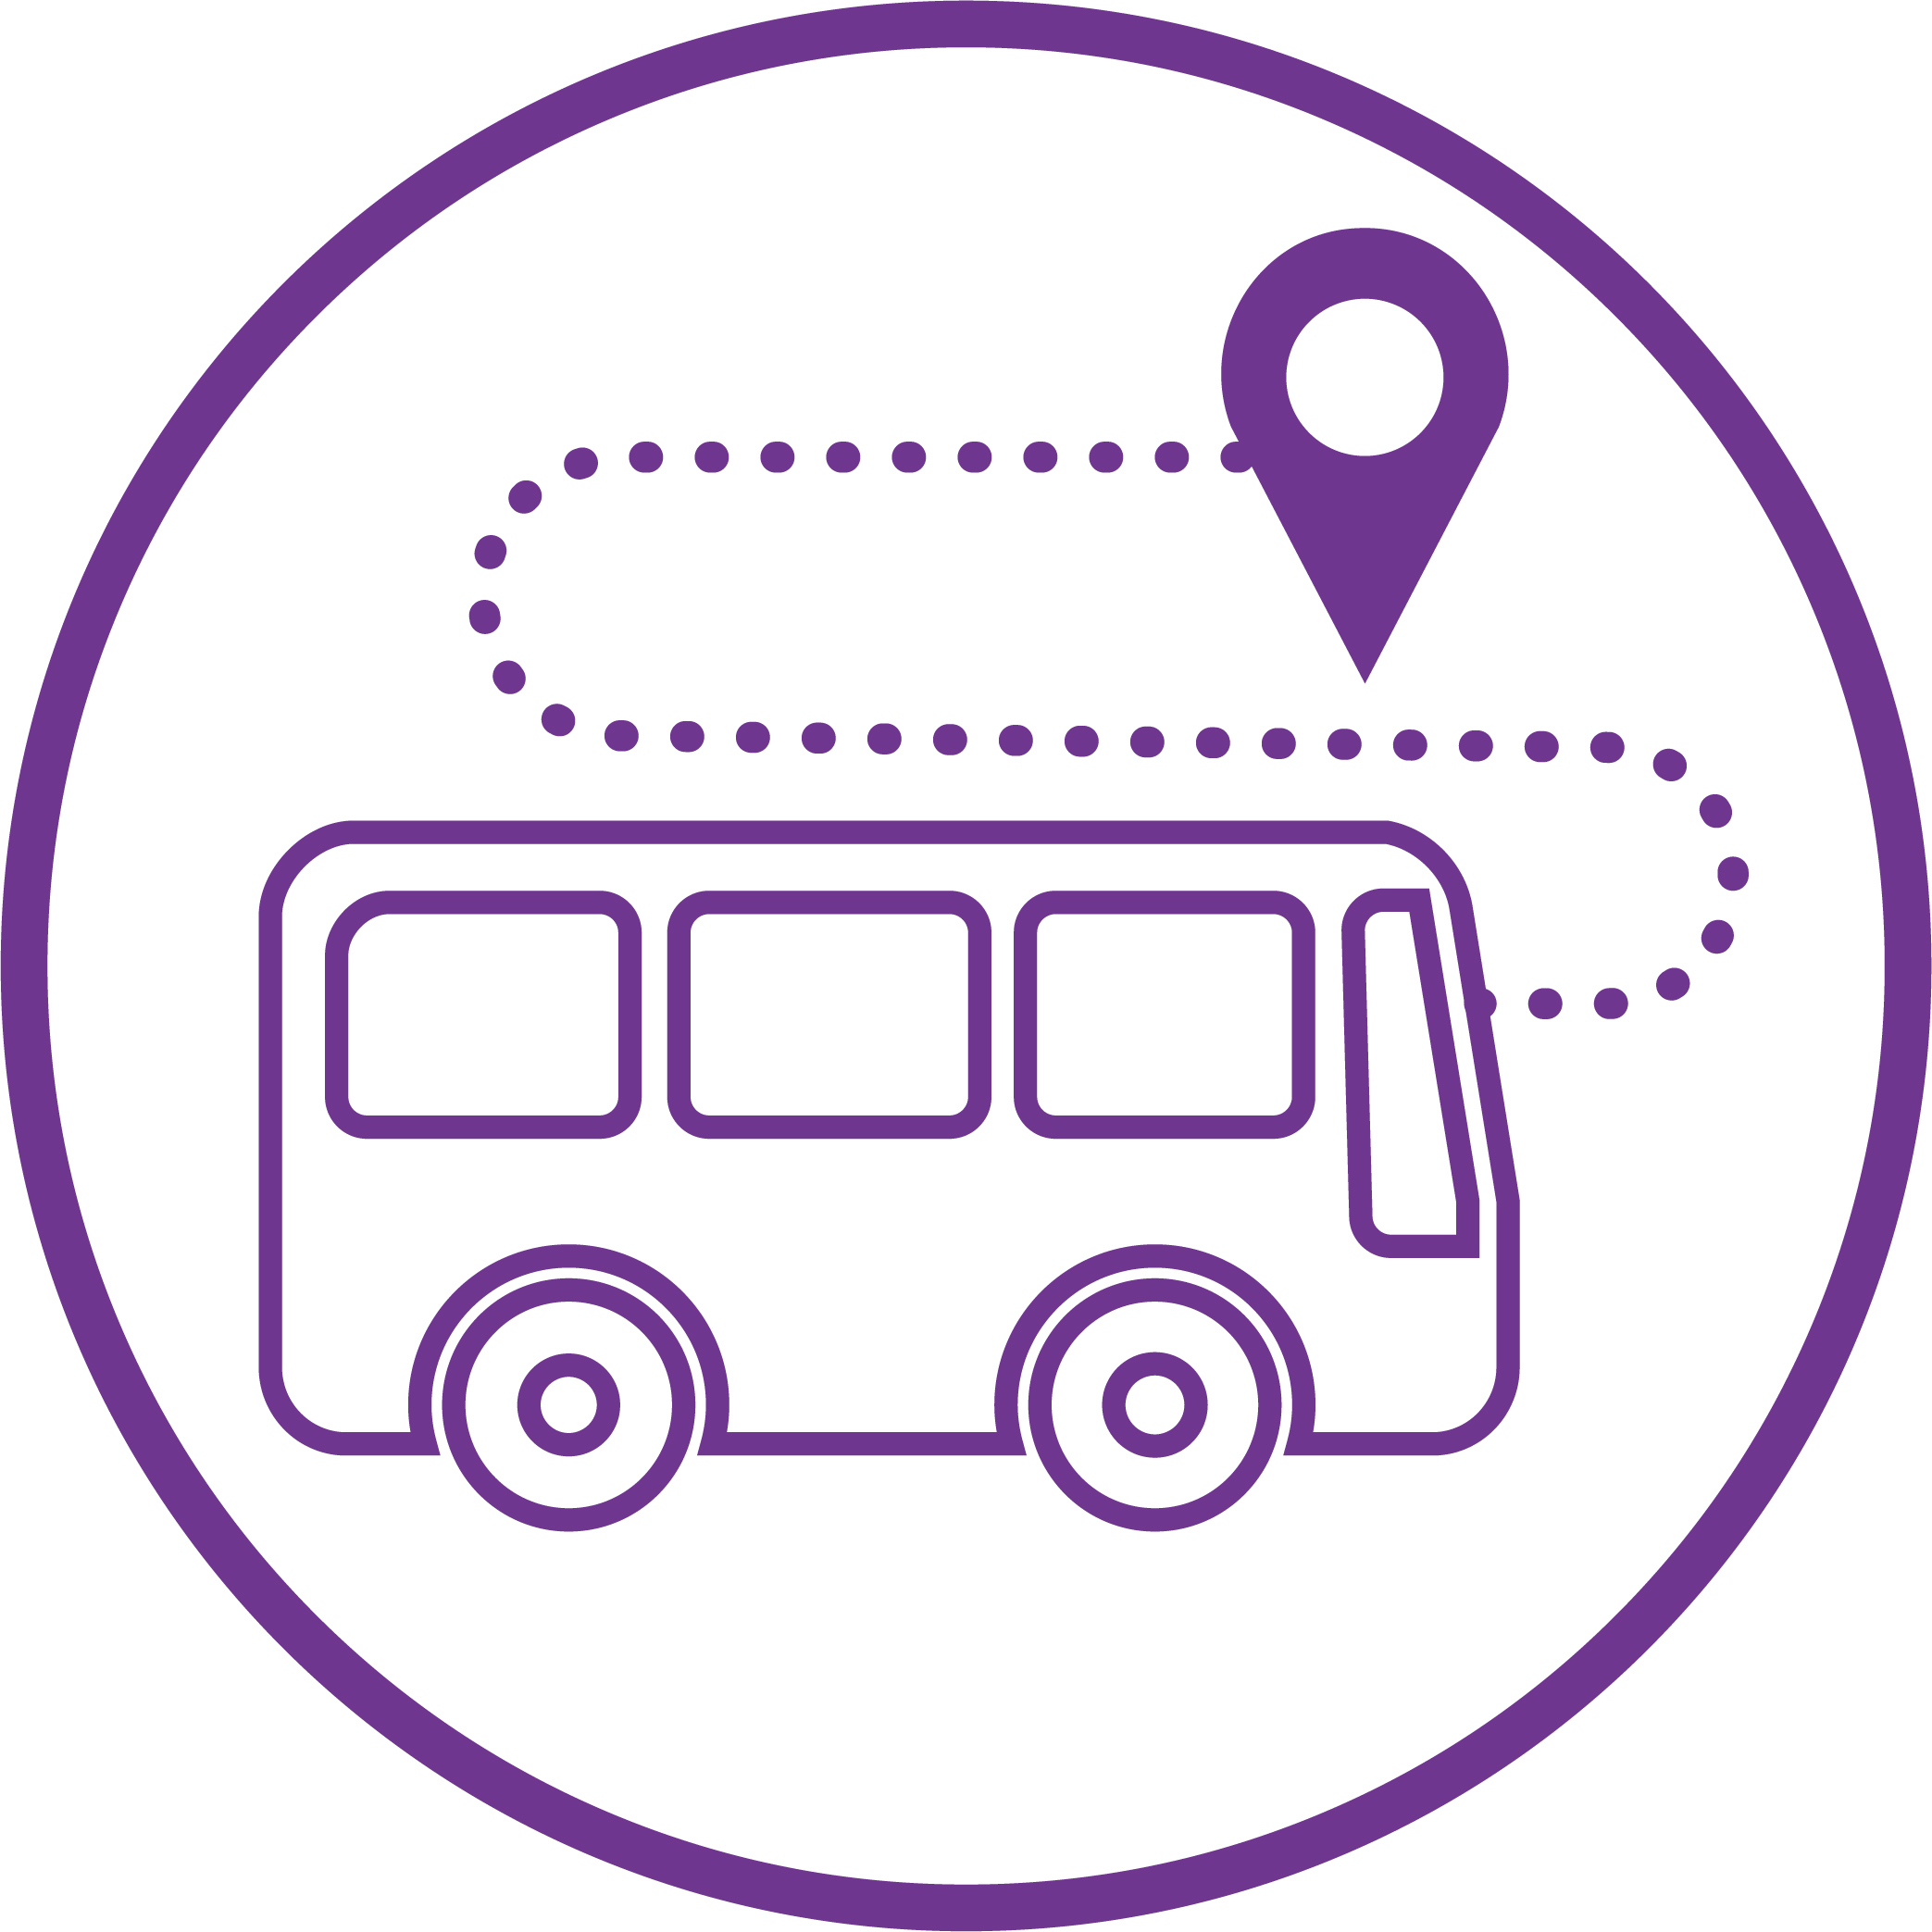 Sector-specific Industry Digital Plans: An icon representing the land transport sector depicting a bus with a location pin illustration